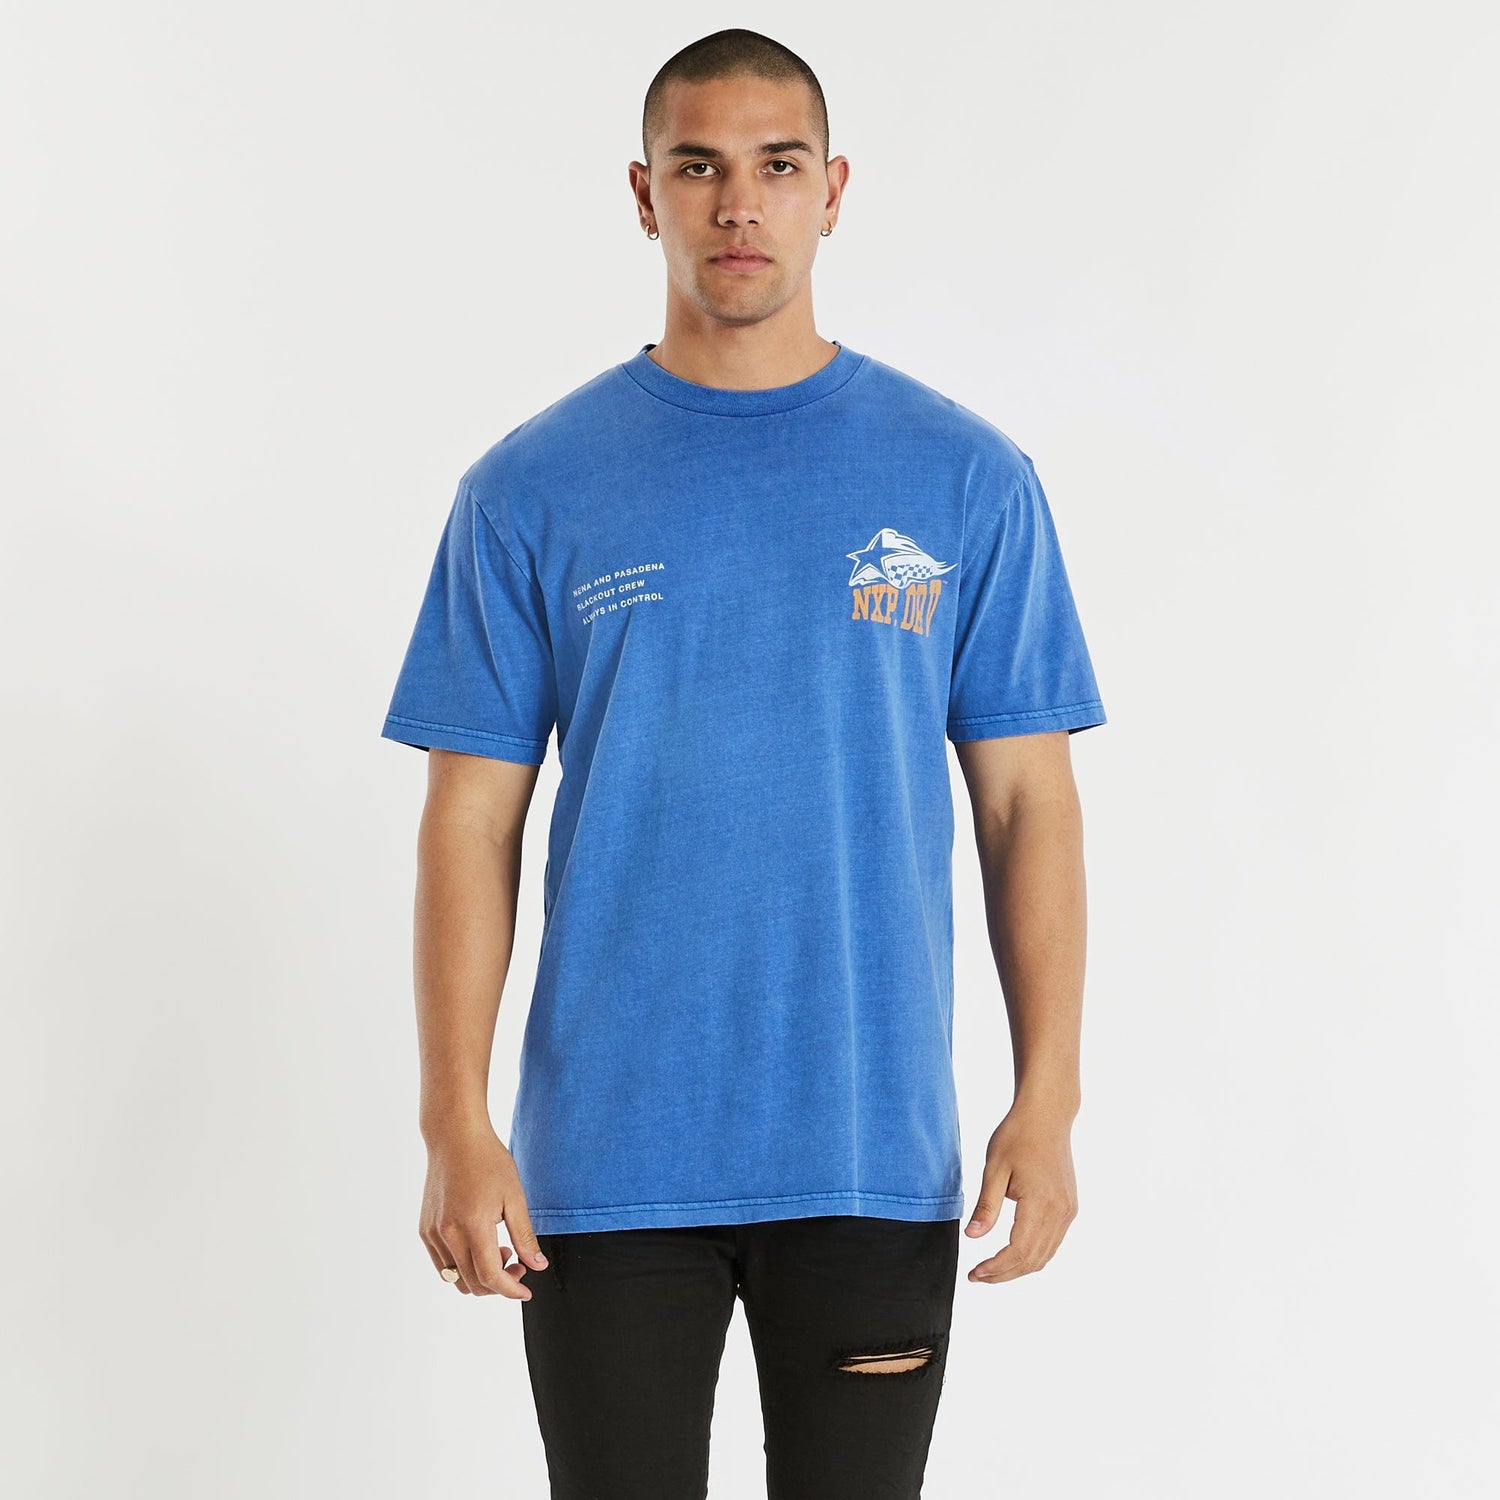 Finish Line Relaxed T-Shirt Pigment Palace Blue